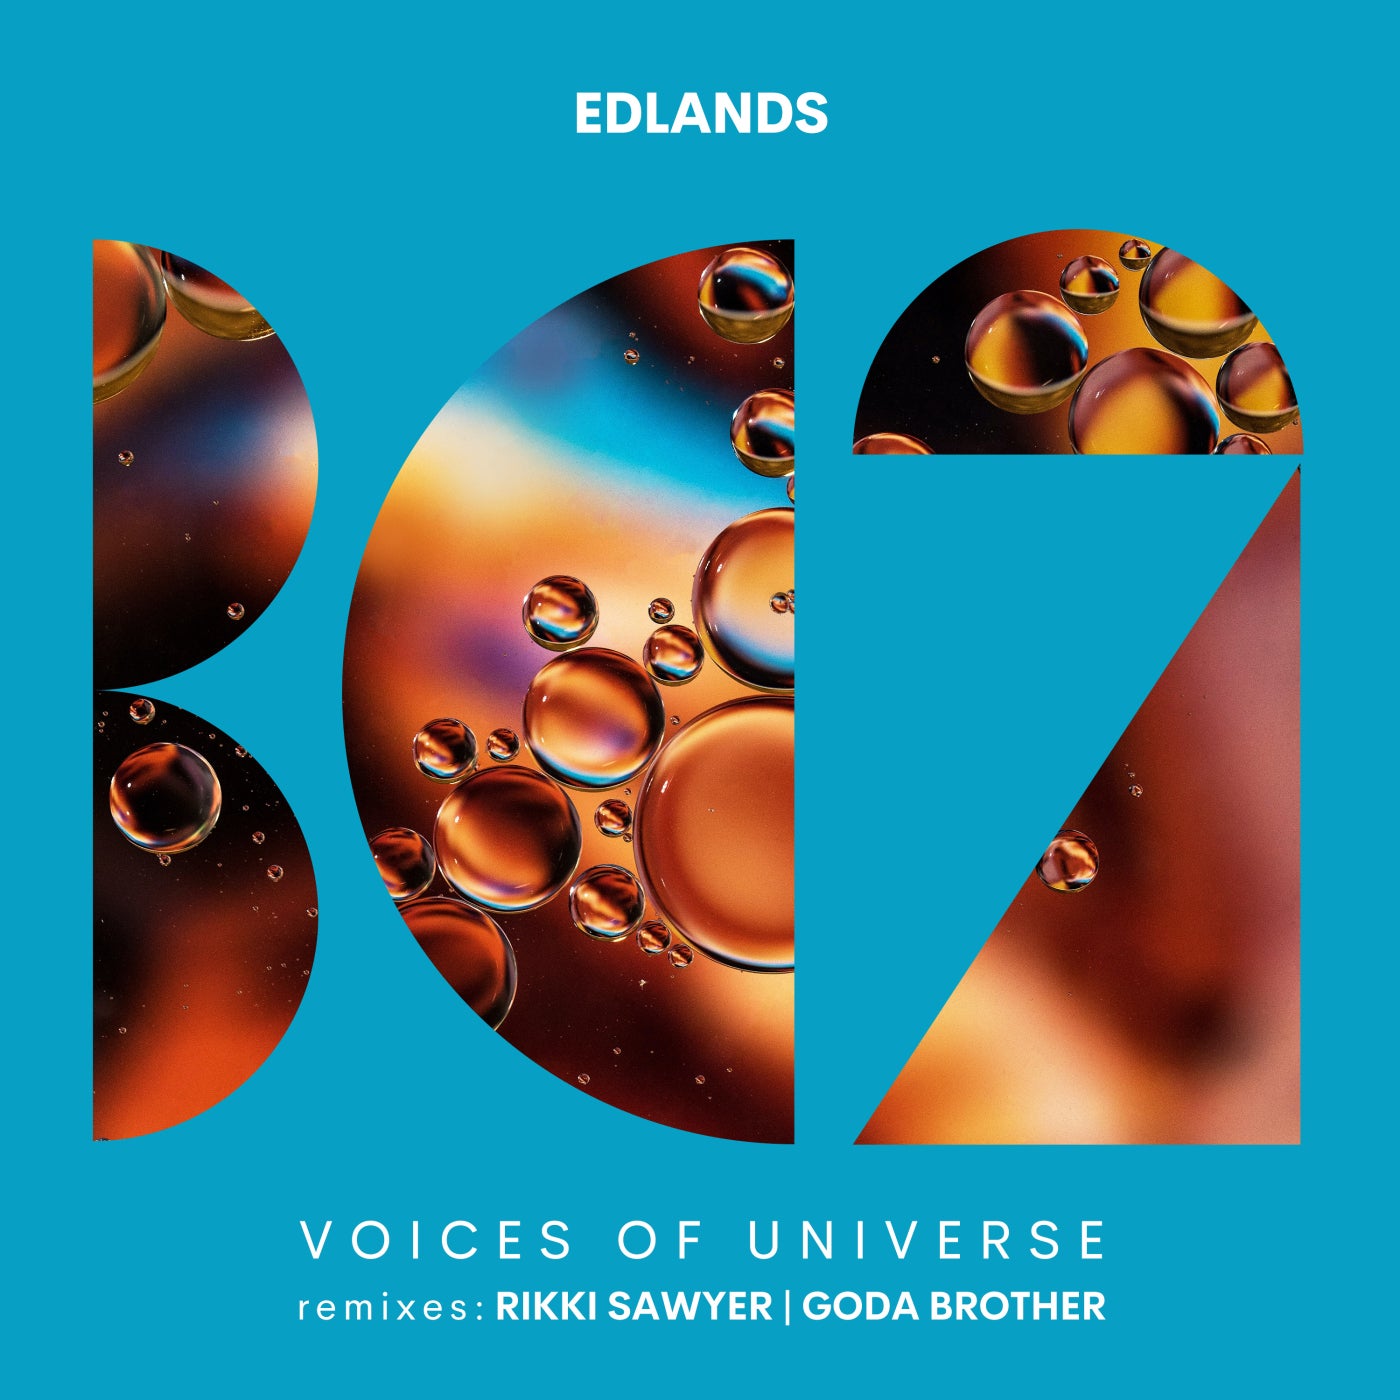 Voices of Universe